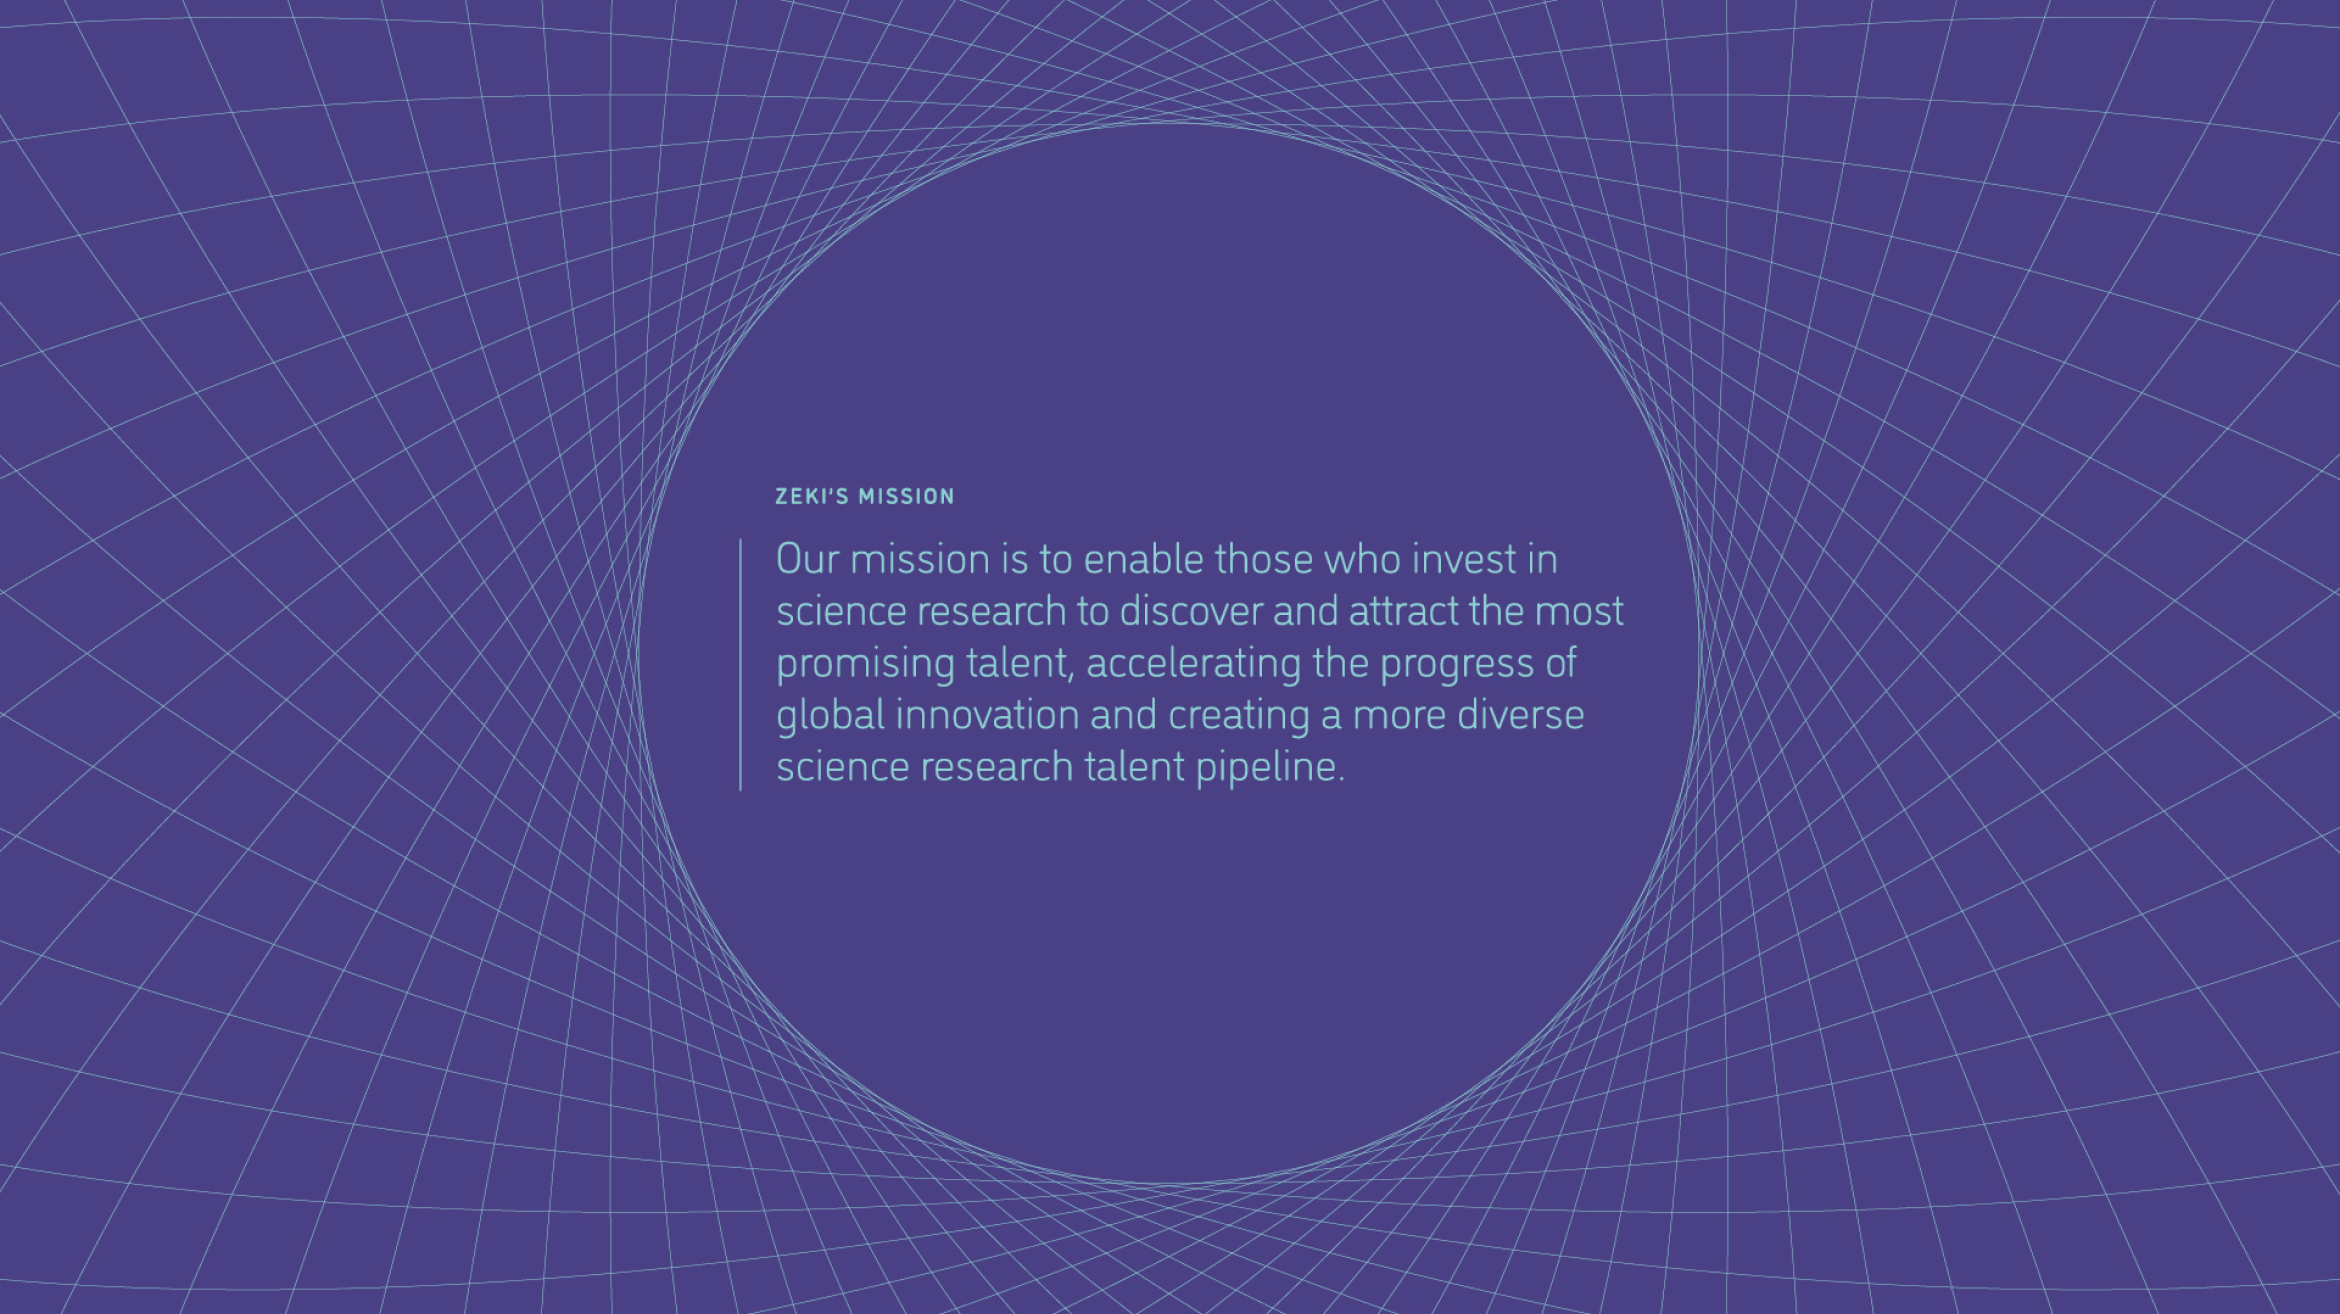 A blue background features a circular text area at the center with the heading "Zeki's Mission" and the mission statement: "Our mission is to enable those who invest in science research to discover and attract the most promising talent, accelerating the progress of global innovation and creating a more diverse science research talent pipeline." The circle is surrounded by a geometric, grid-like pattern creating a visually engaging frame.